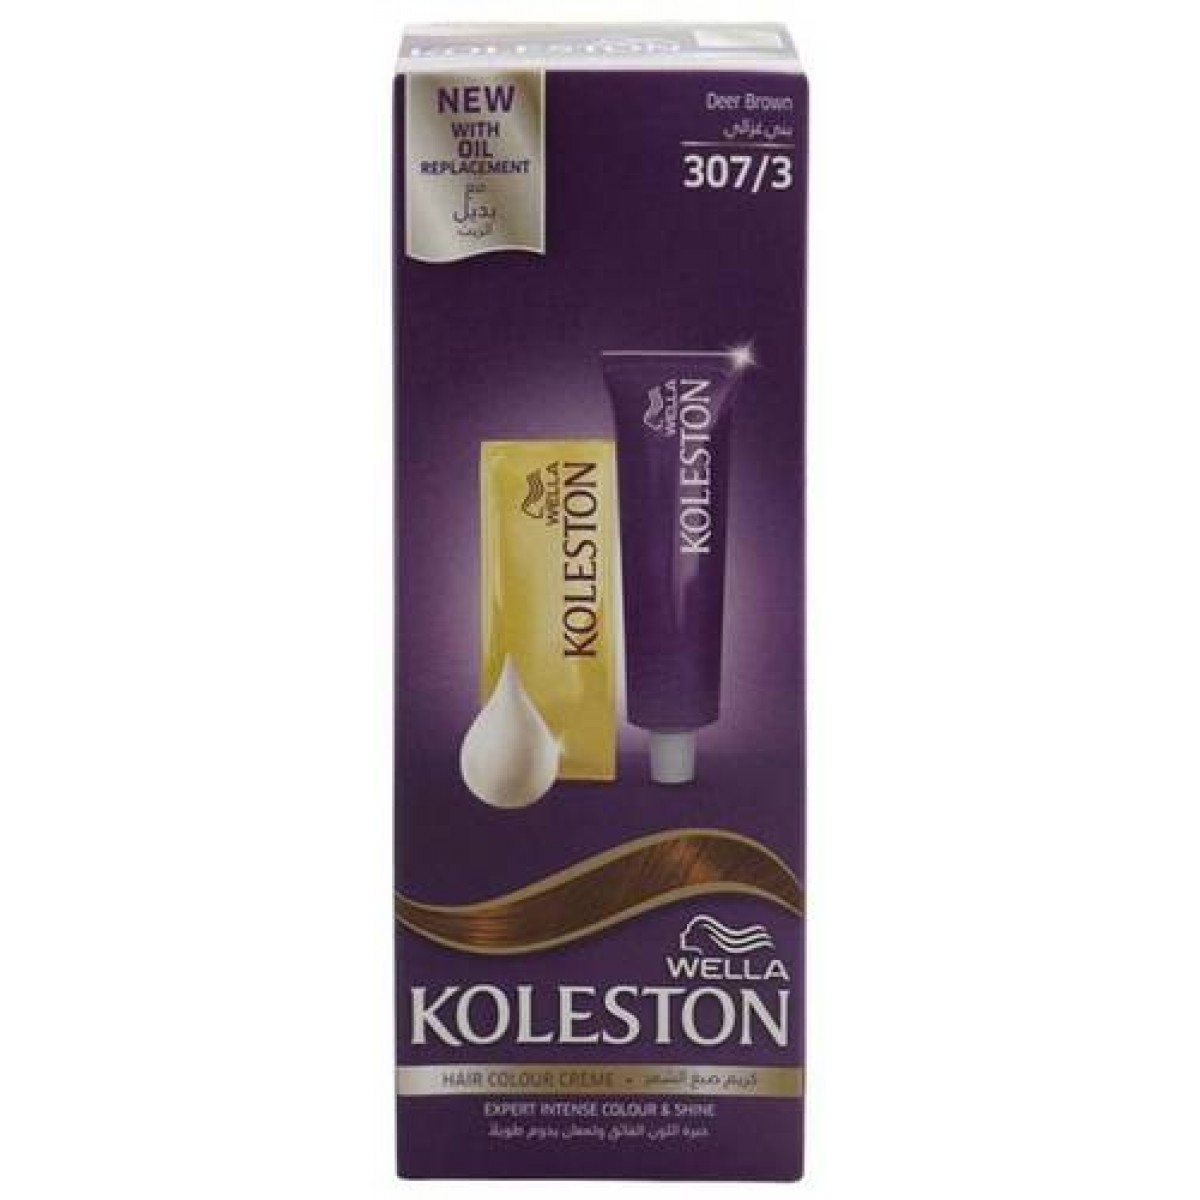 Koleston hair color 307/3 with oil replacement, hazelnut